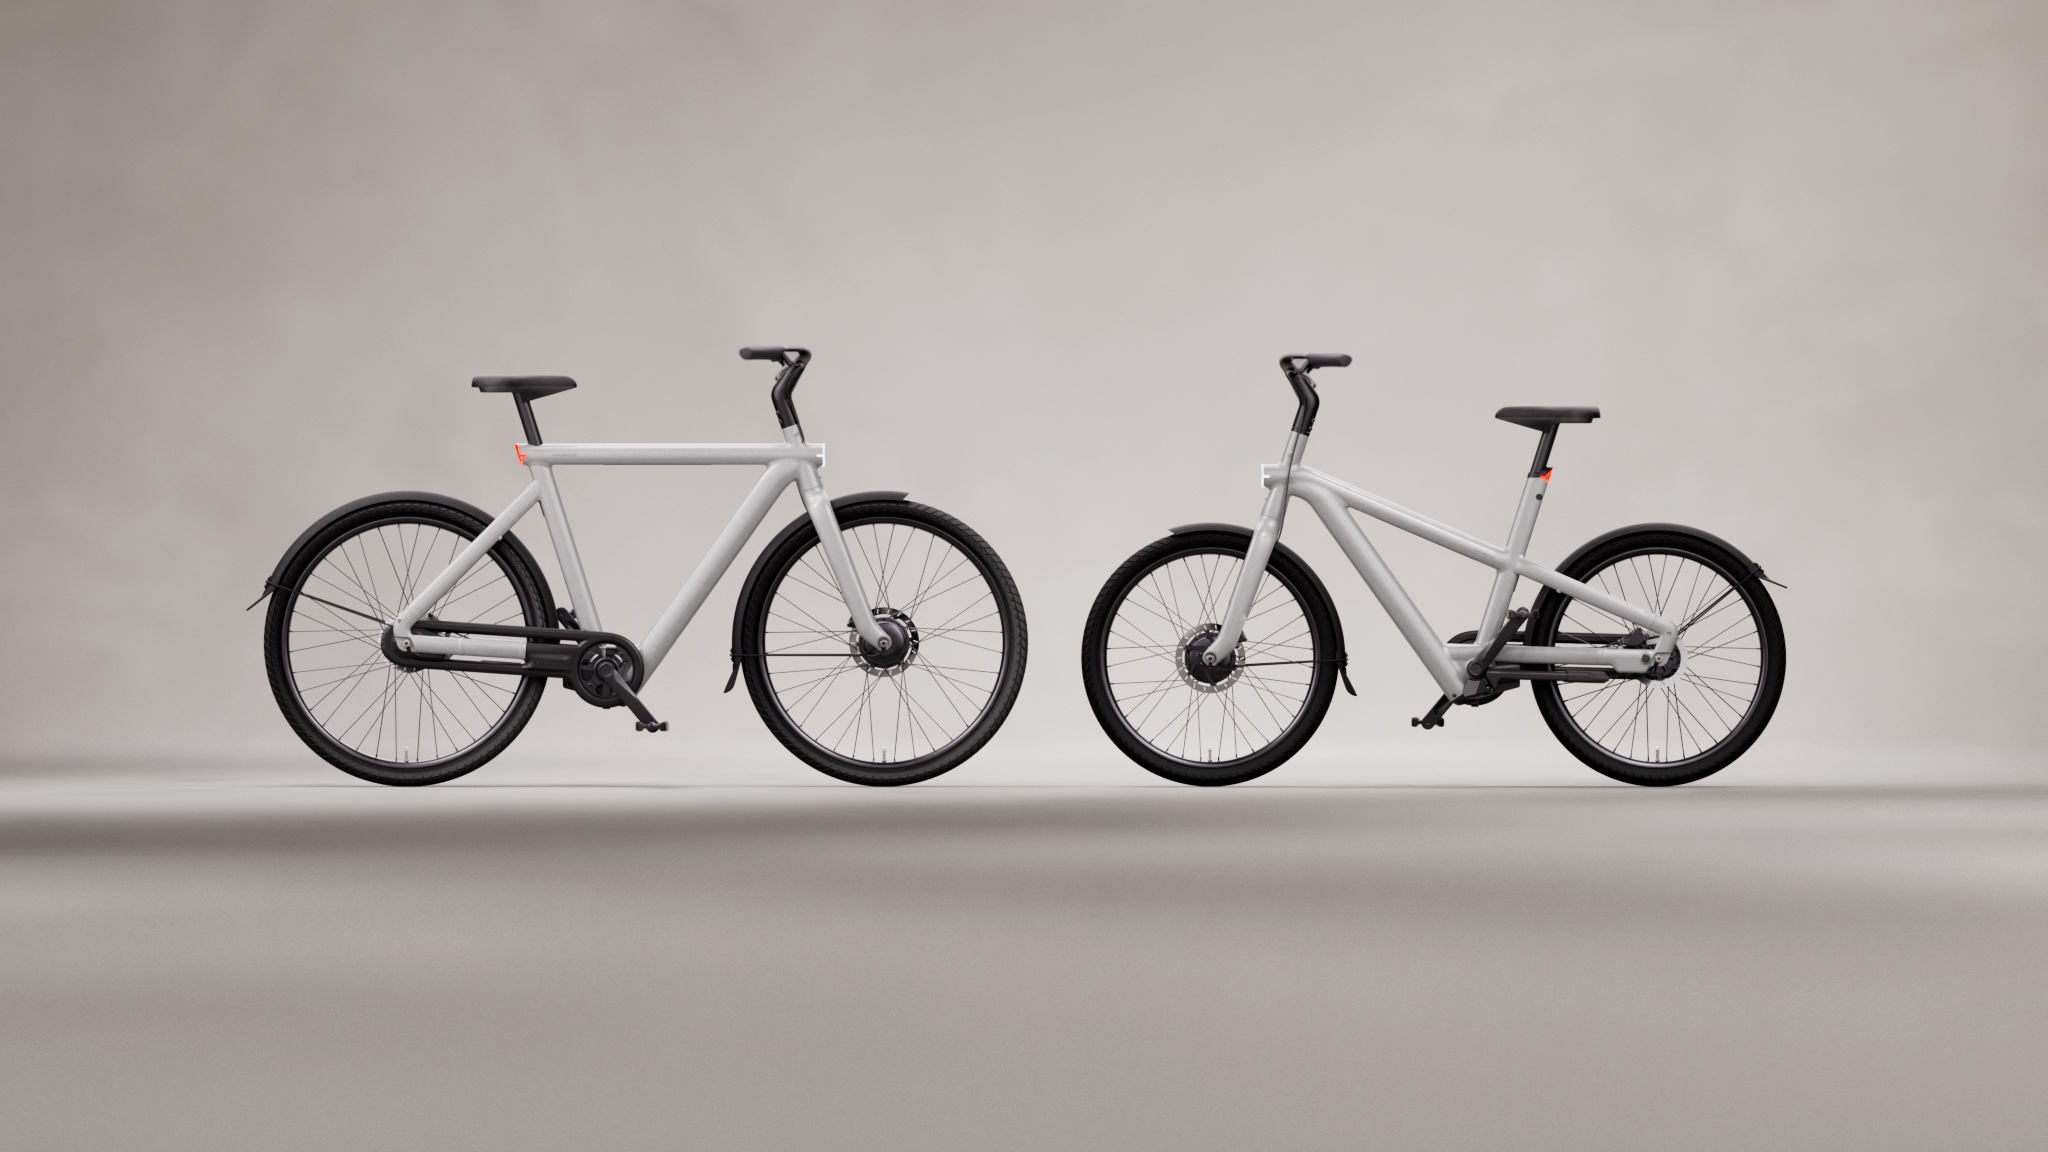 VanMoof coming back to life: New owners outline plans to make e-bike brand a ‘world-leader’